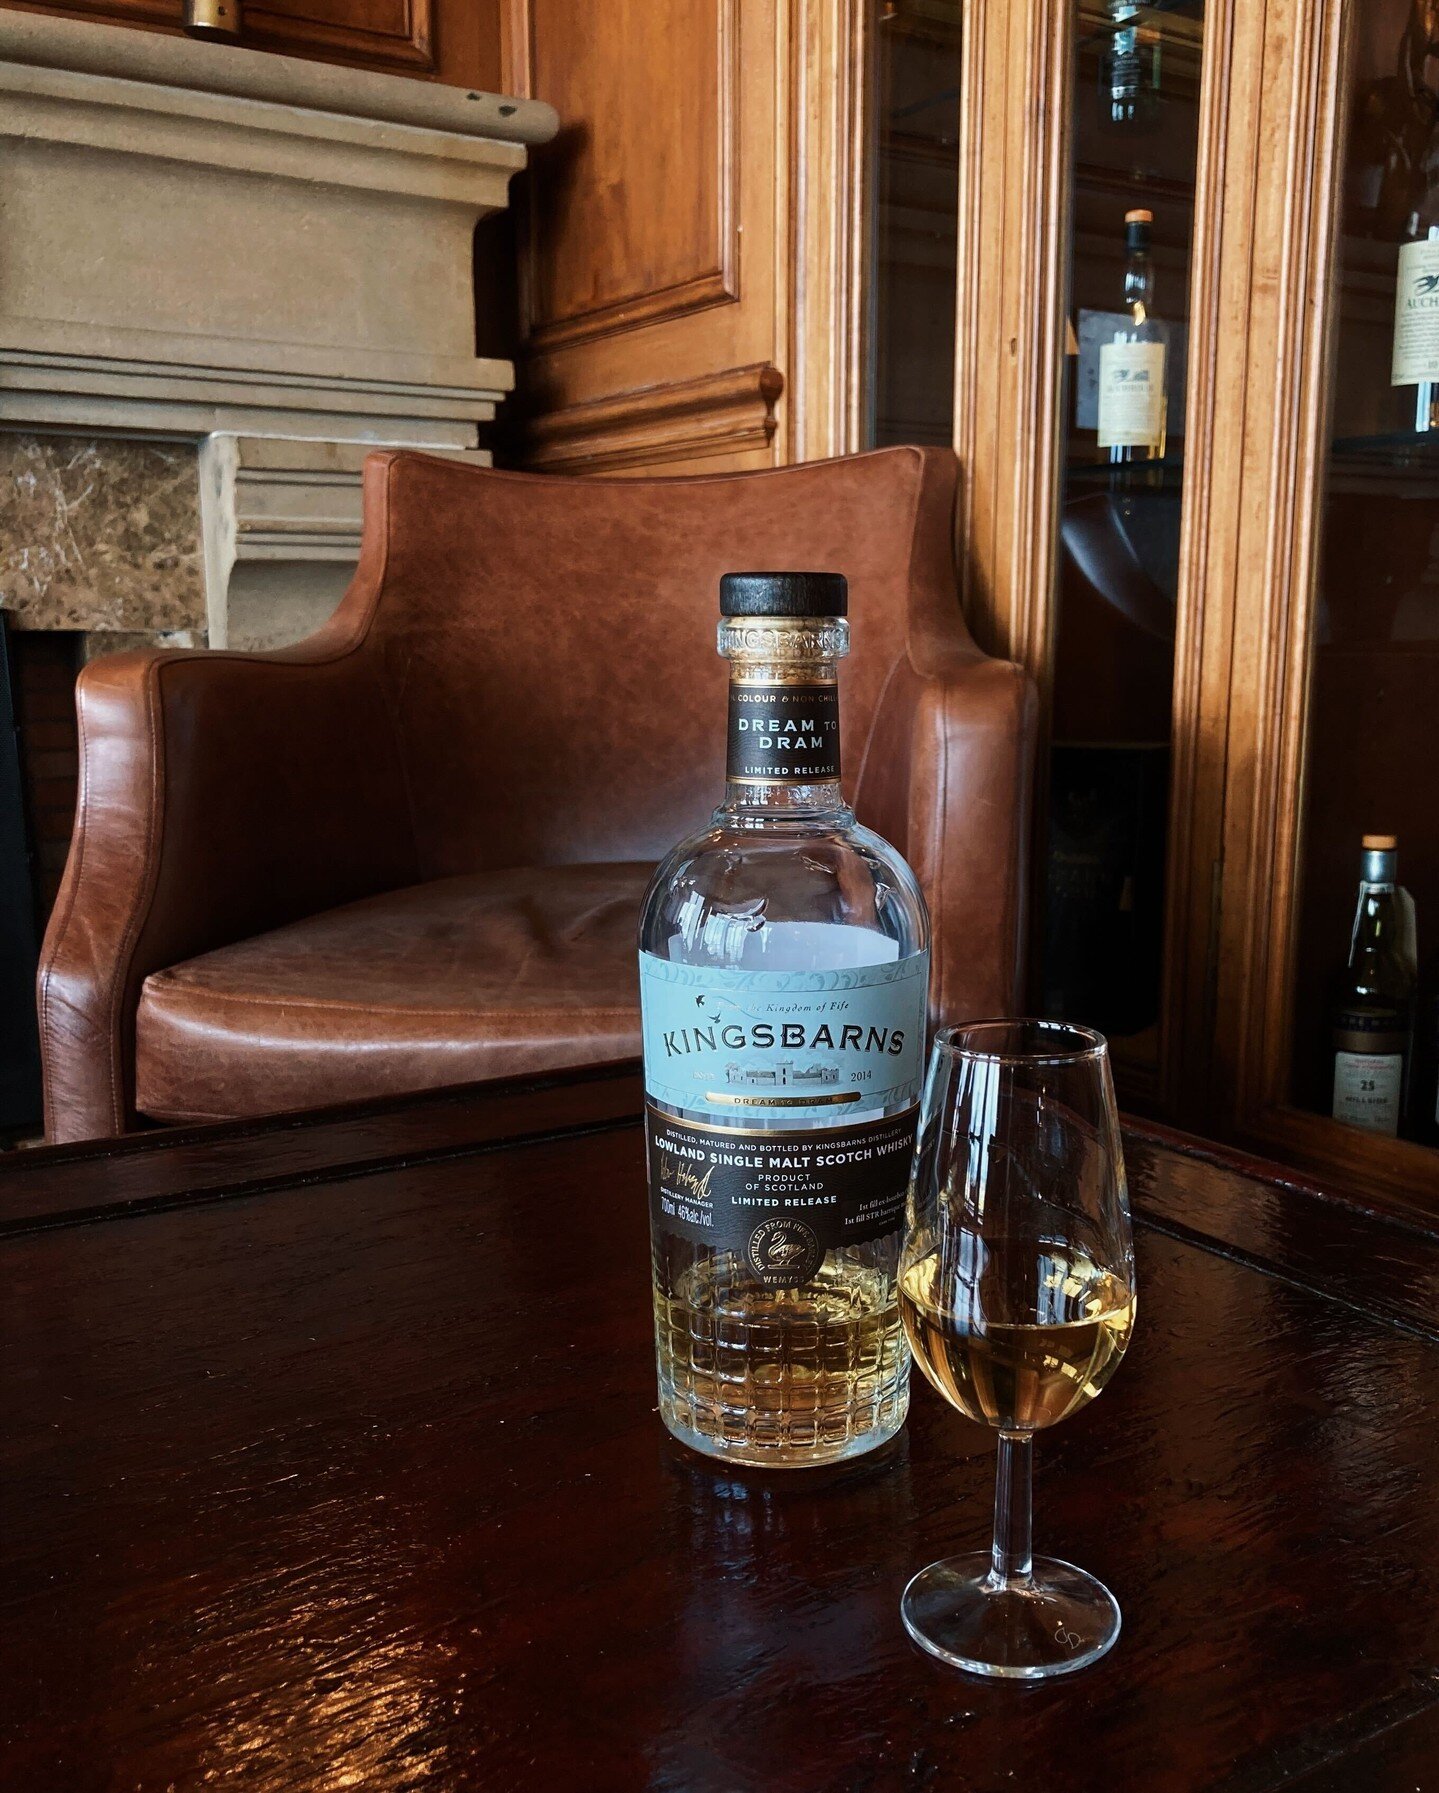 Pull up a chair and join us for a dram 🥃

📍 Road Hole Bar, @oldcoursehotel